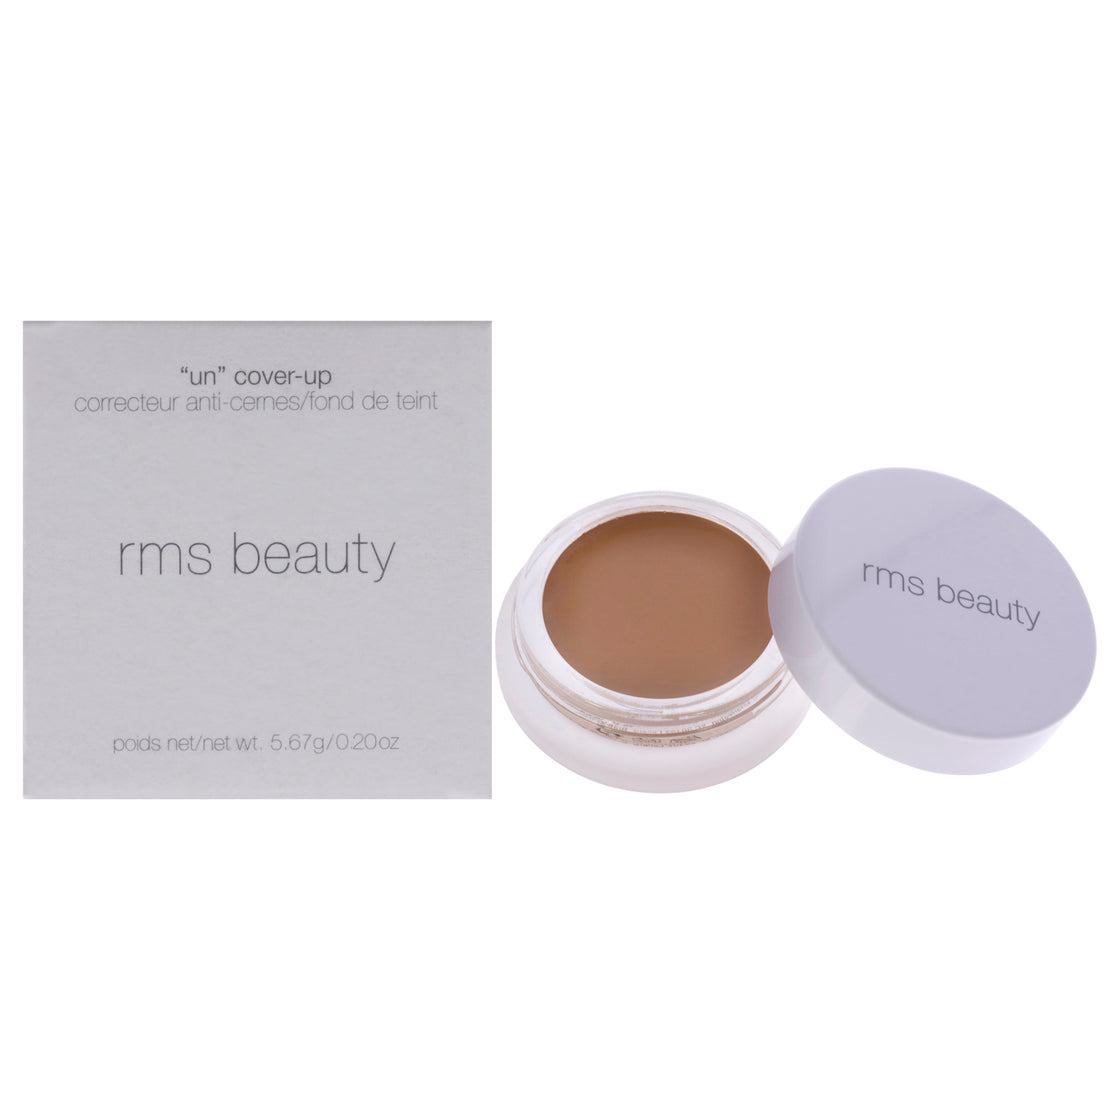 UN Cover-Up Concealer - 22 Light Medium by RMS Beauty for Women - 0.20 oz Concealer